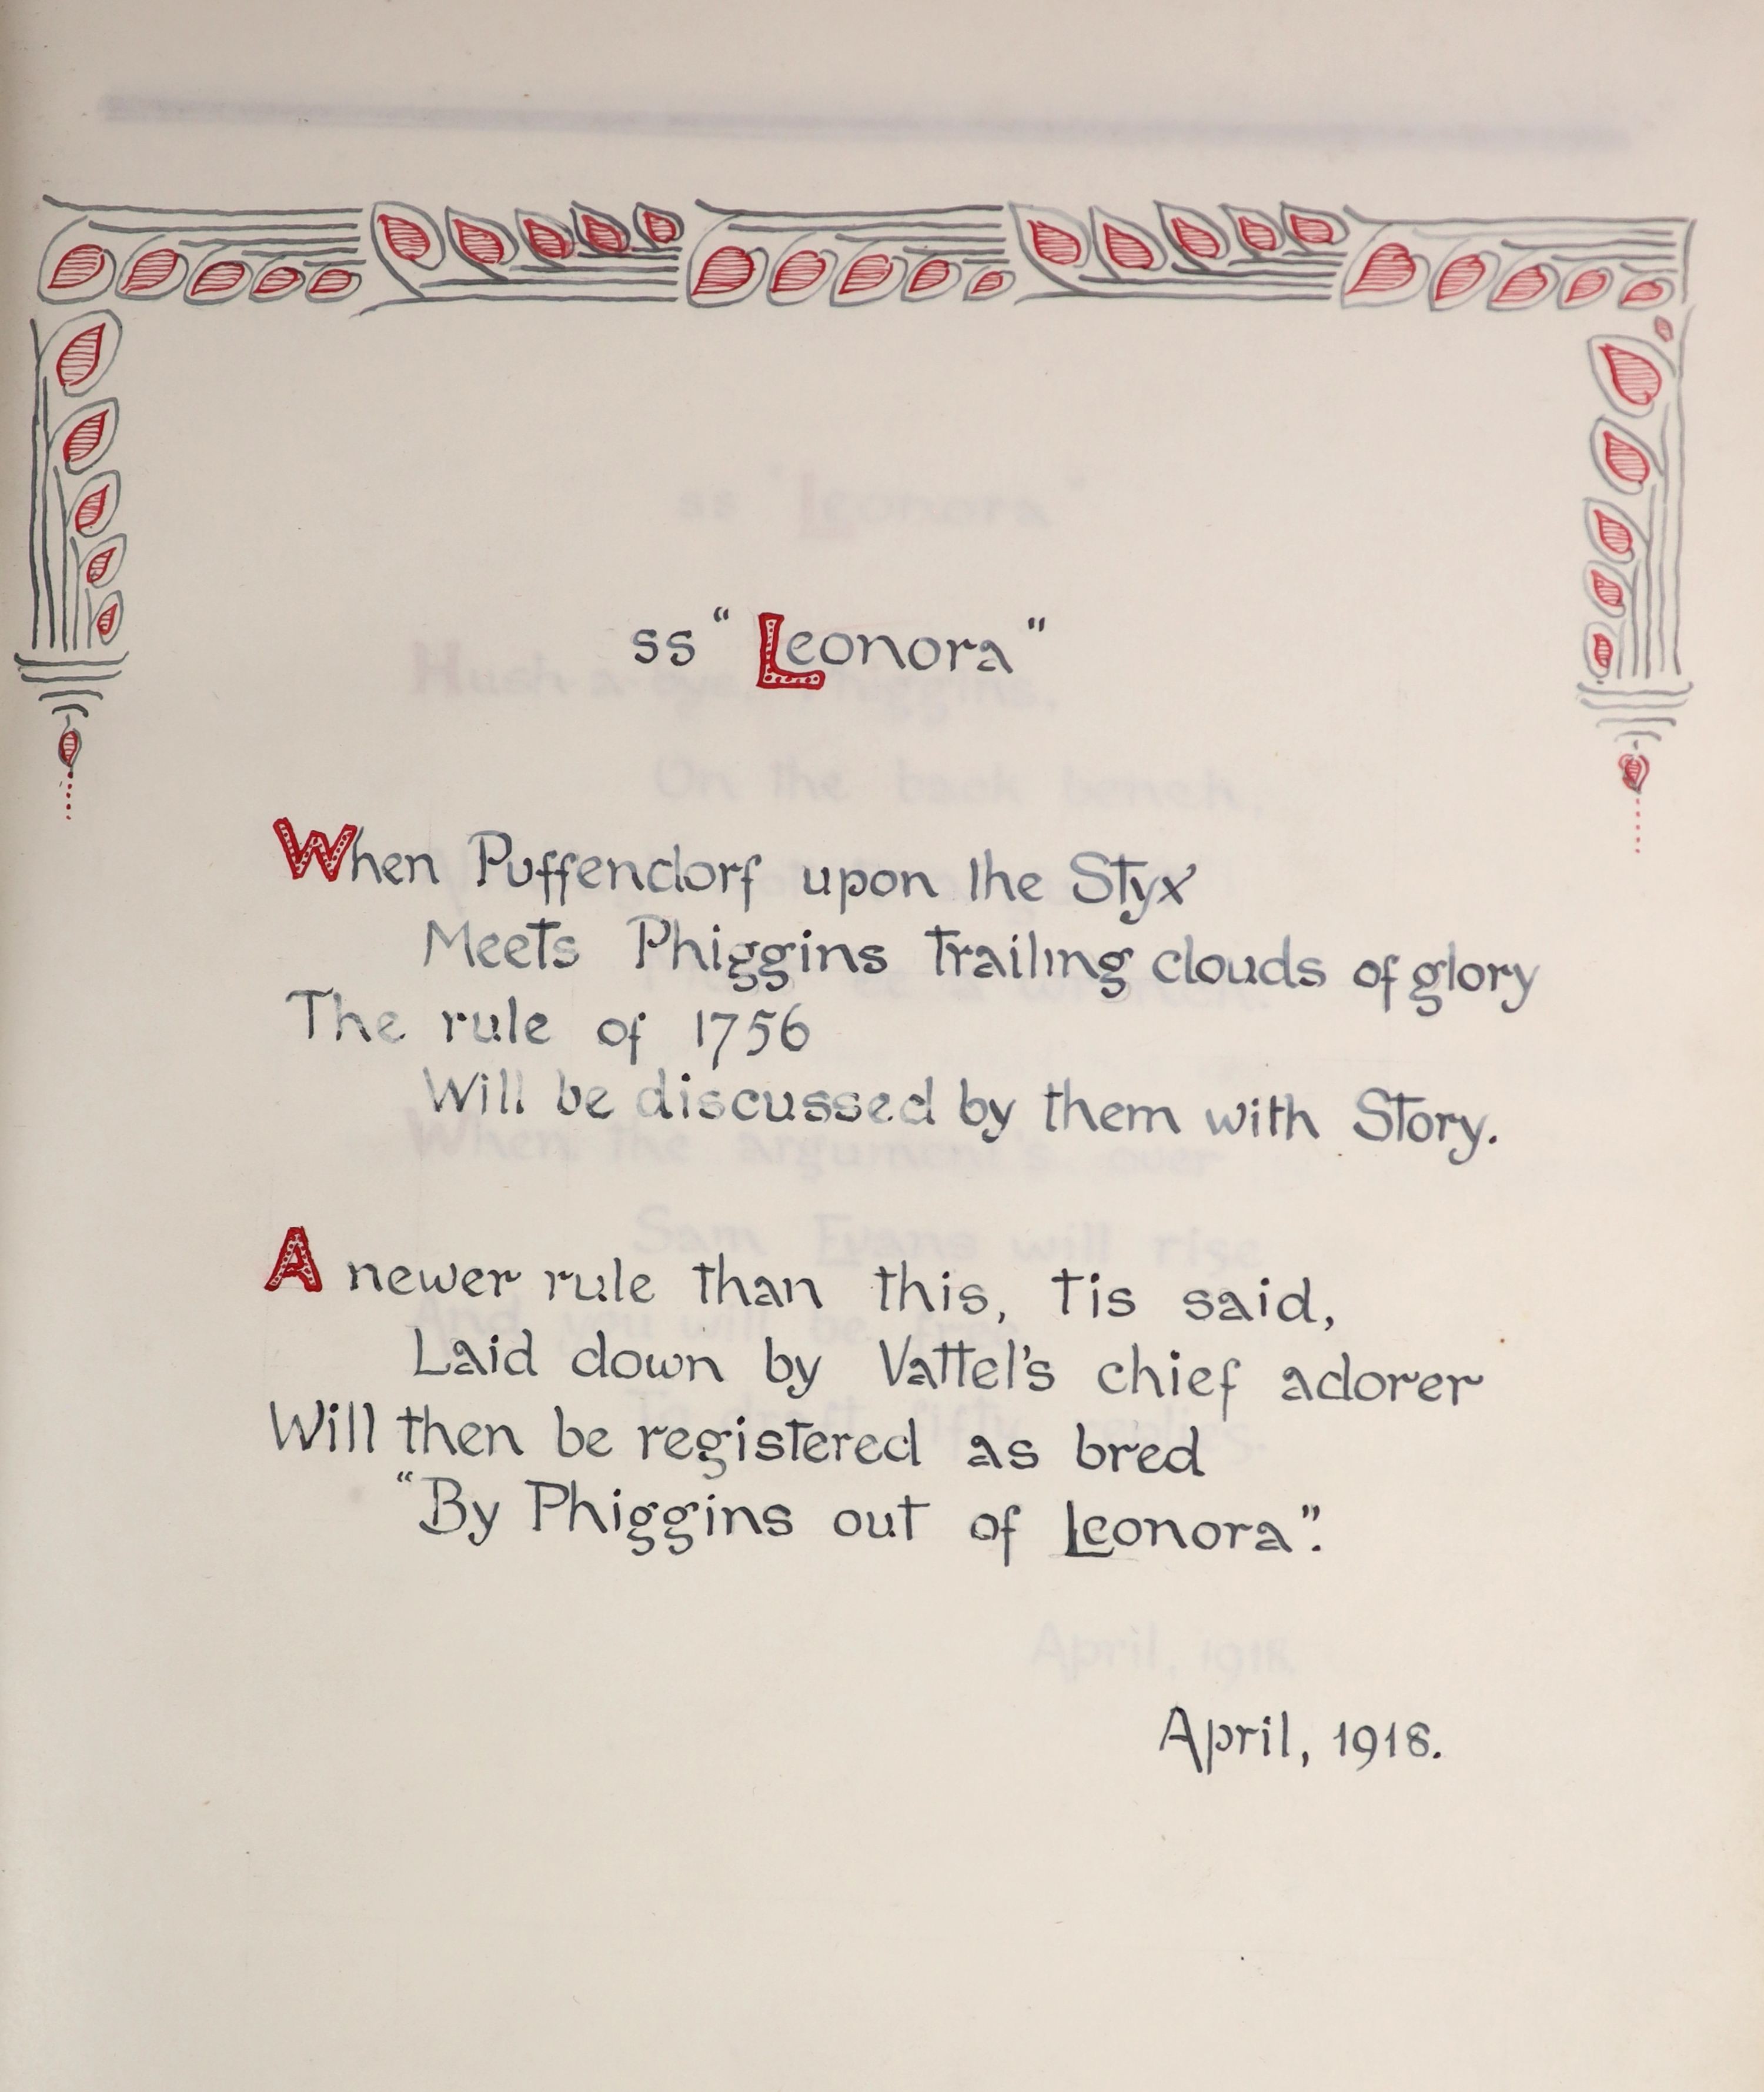 An early 20th century album of manuscript poetry and verse, in a fine calligraphic hand, mainly in black ink, with rubricated capitals, interspersed with 18 comical caricatures, drawn in black, red and blue pen and ink